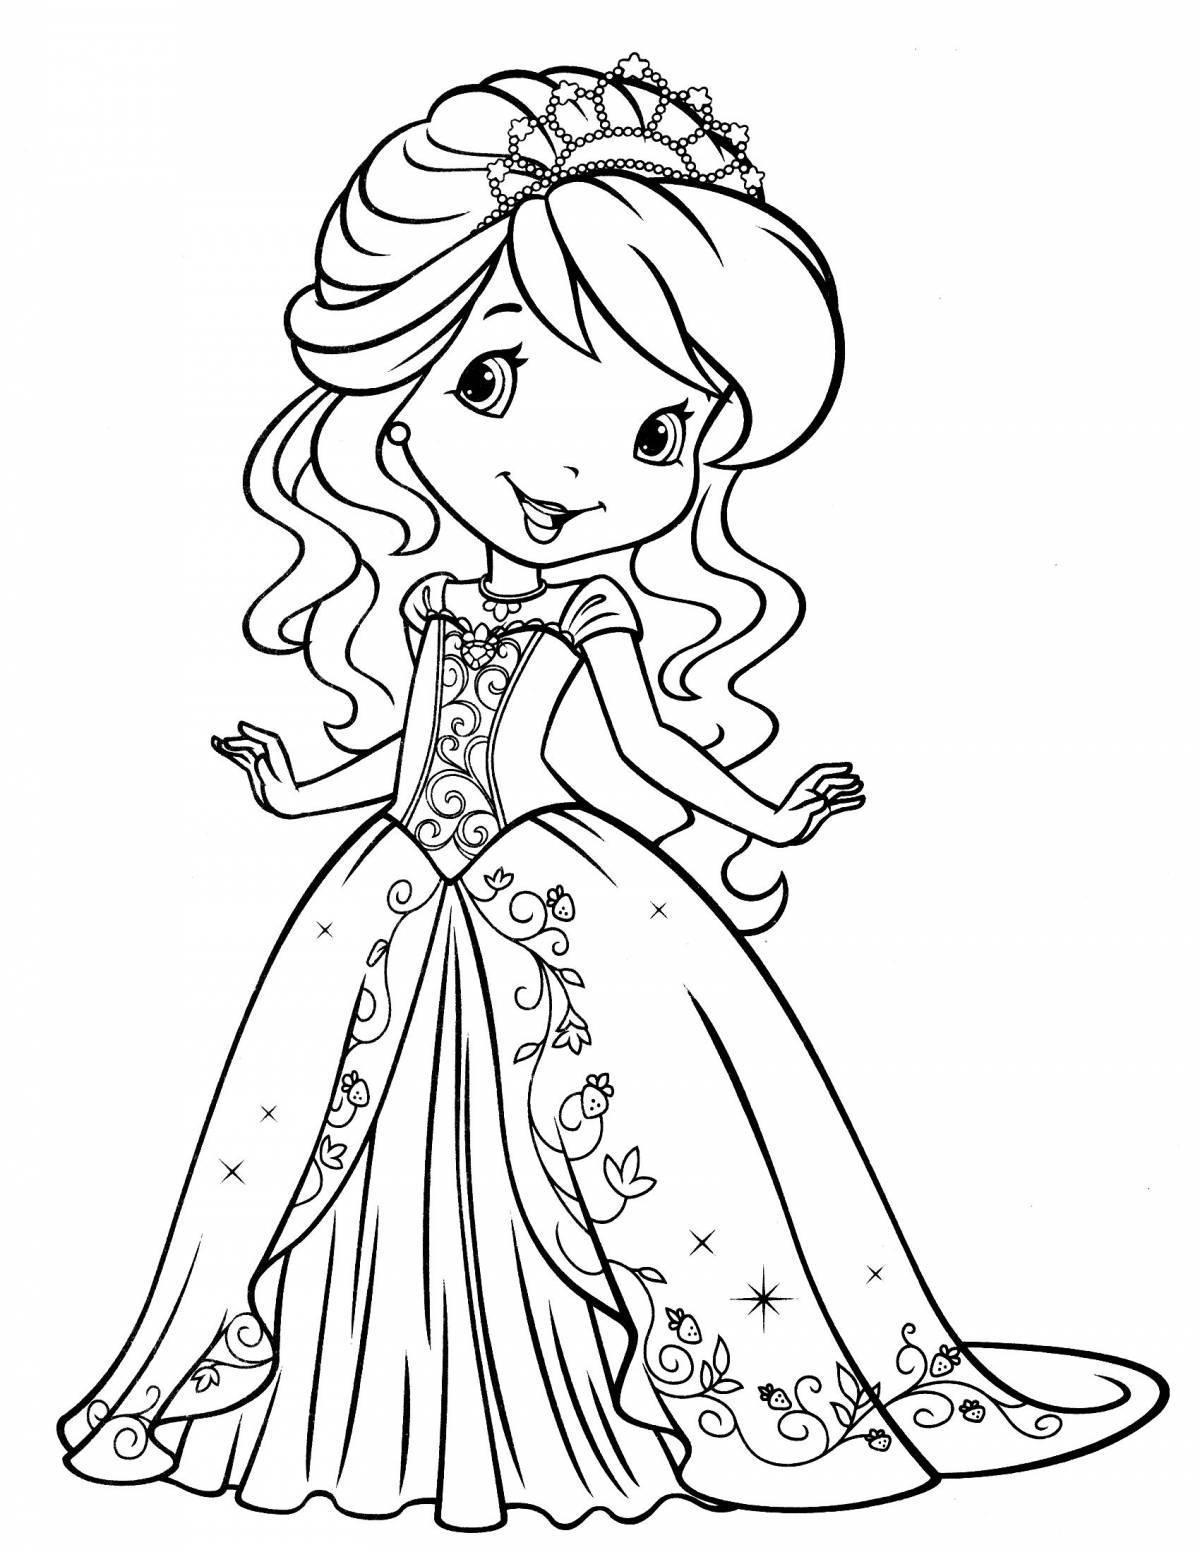 Violent coloring pages for girls